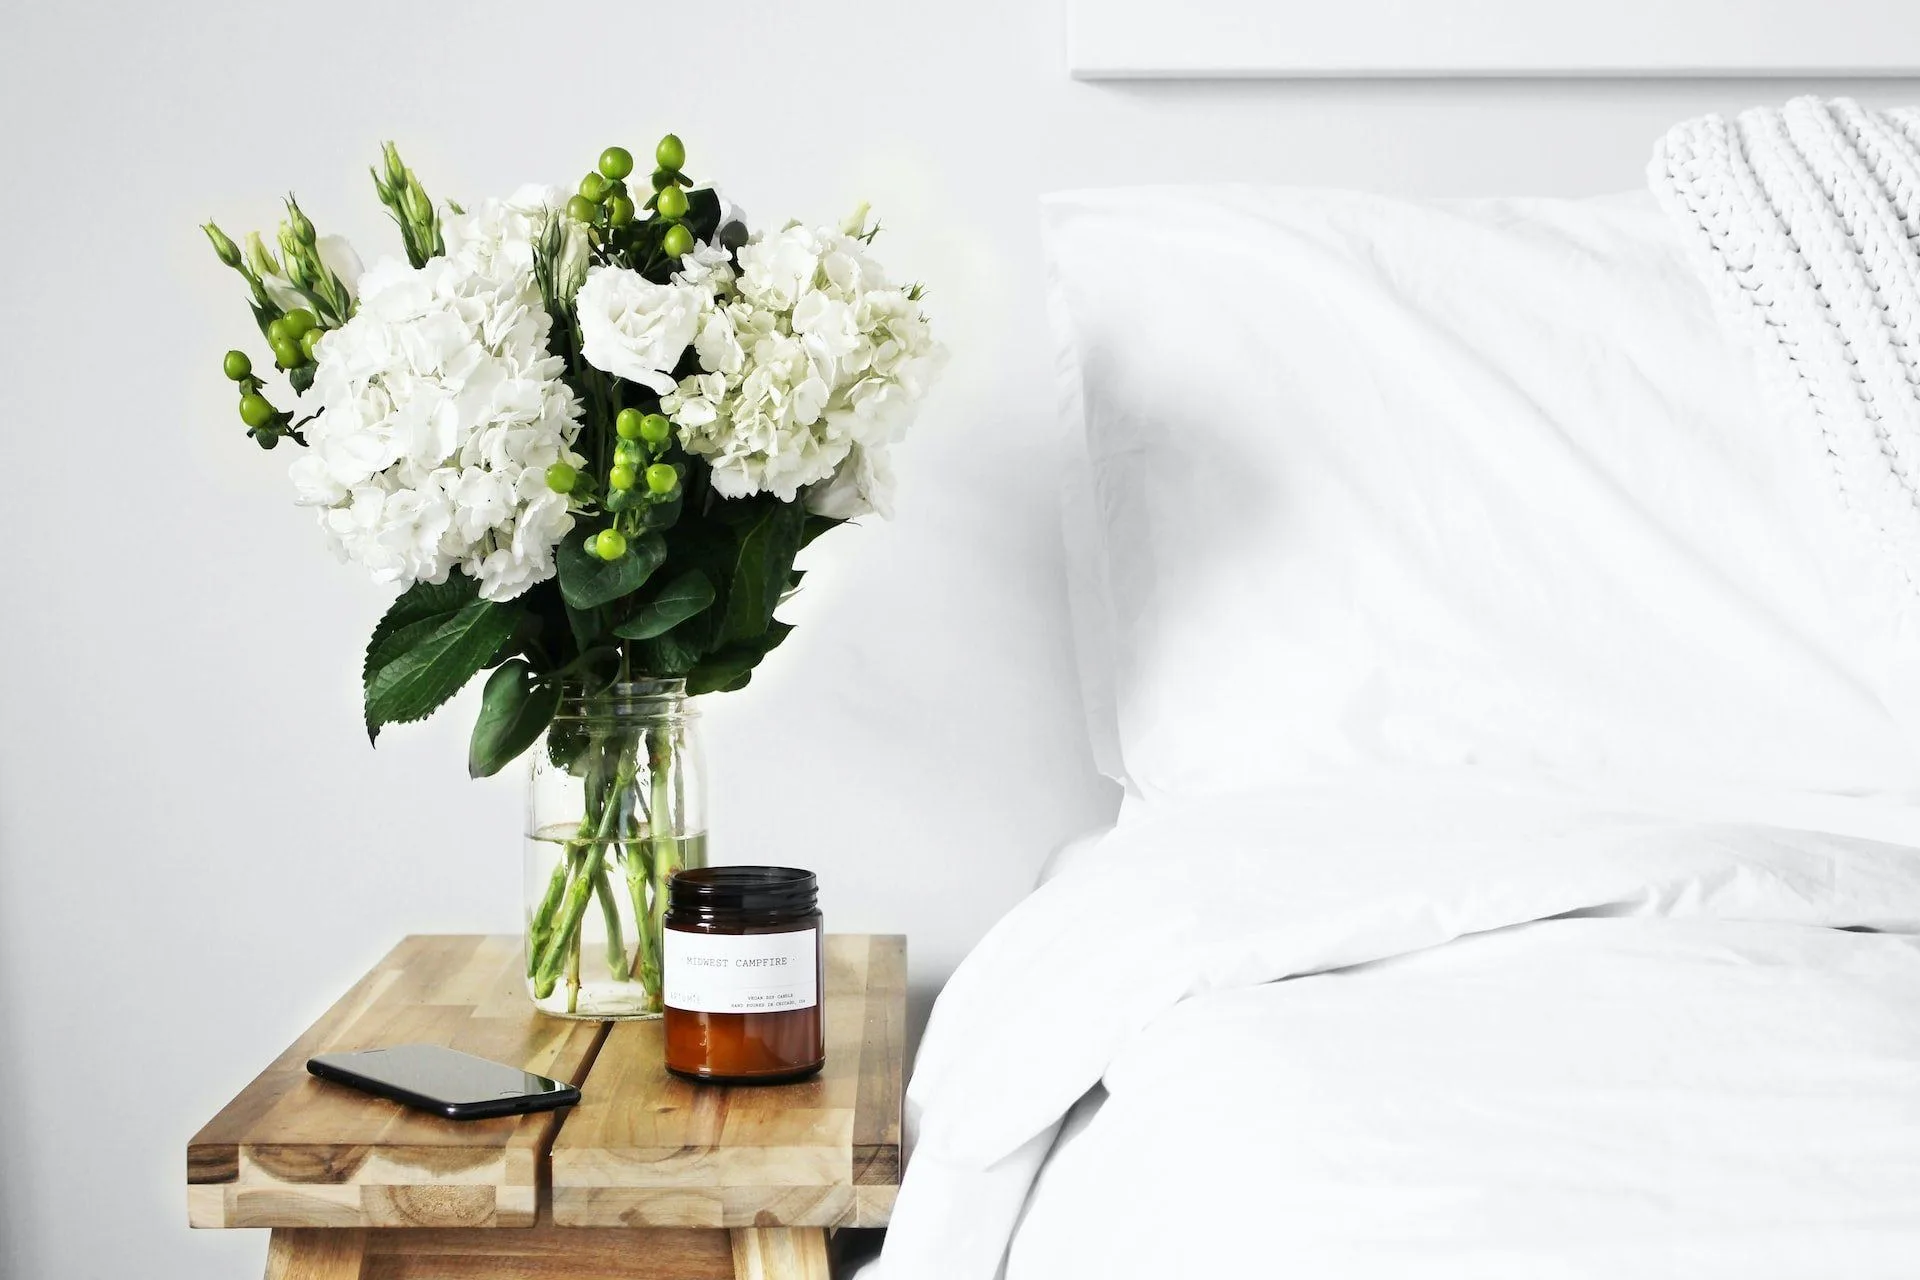 Your Bed Linen Can Impact Your Skin’s Health. Here’s How